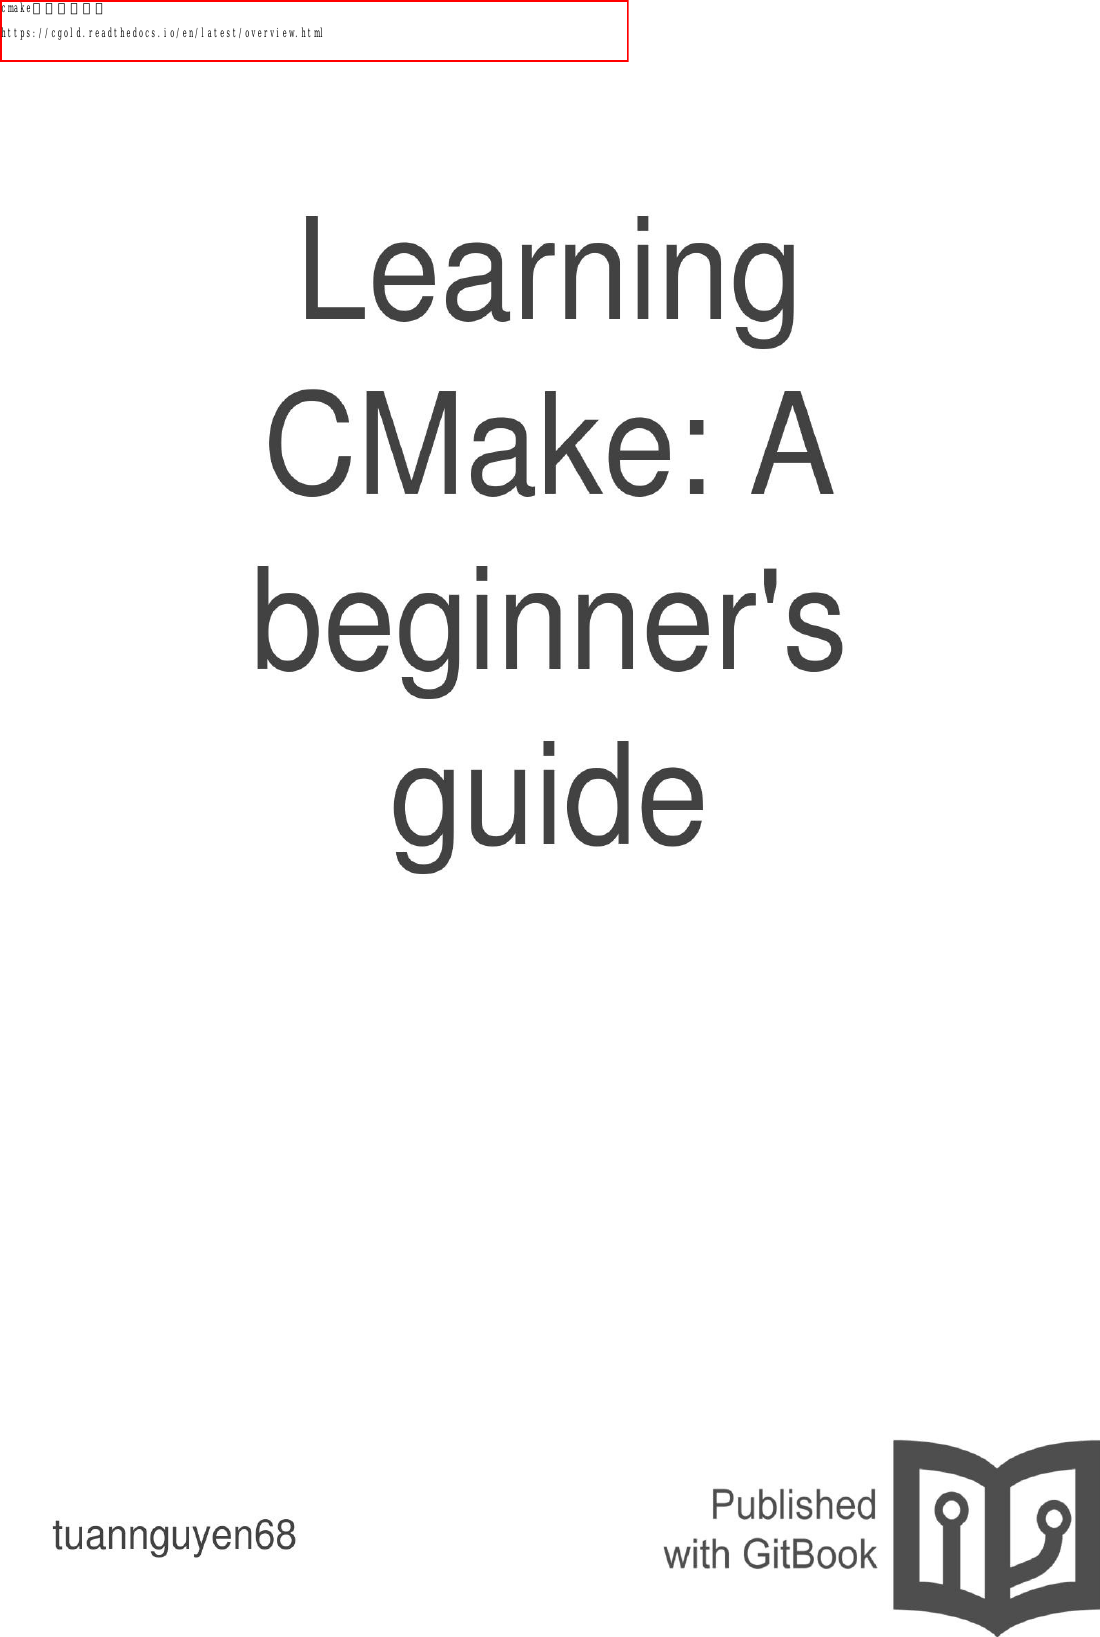 Page 1 of 7 - Learning CMake: A Beginner's Guide Learning-cmake-a-beginner-s-guide